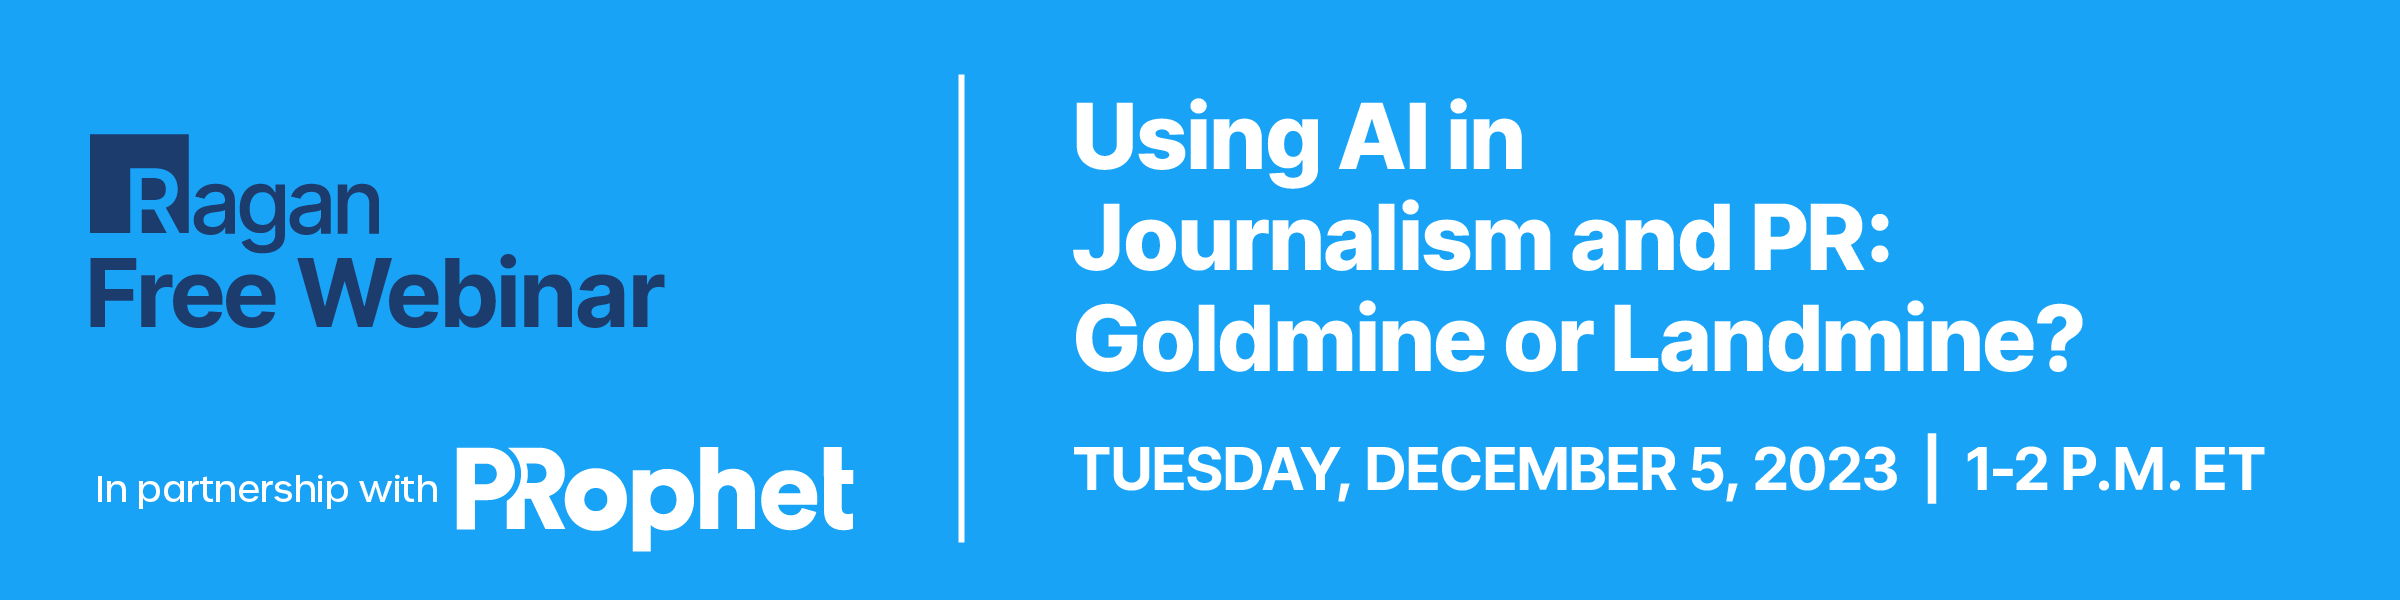 Presentation Handouts For: Y23SWPR0711 -   Using AI in Journalism and PR: Goldmine or Landmine